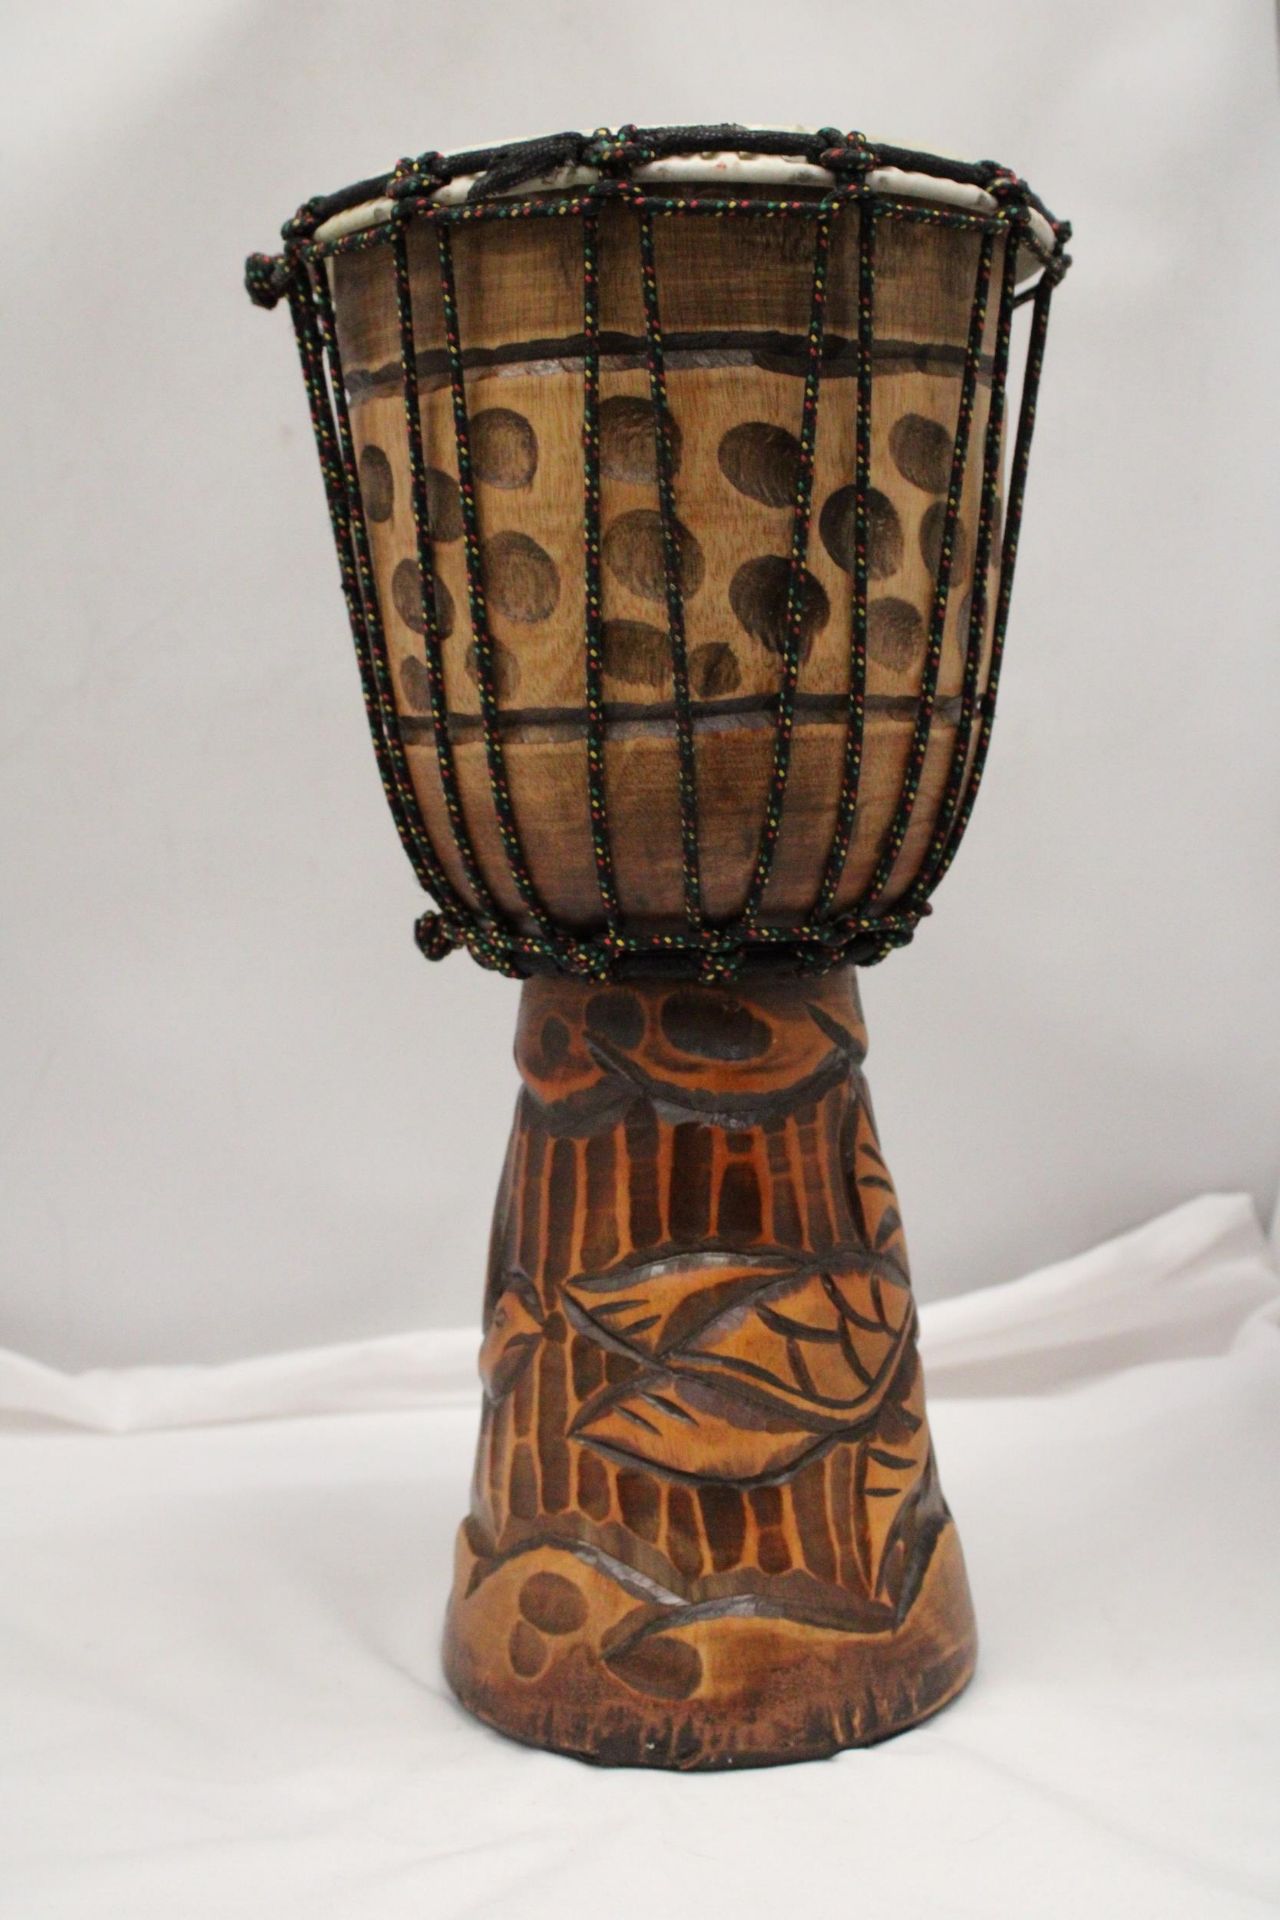 A WOODEN HAND CARVED BONGO DRUM APPROXIMATELY 40CM HIGH - Image 4 of 4